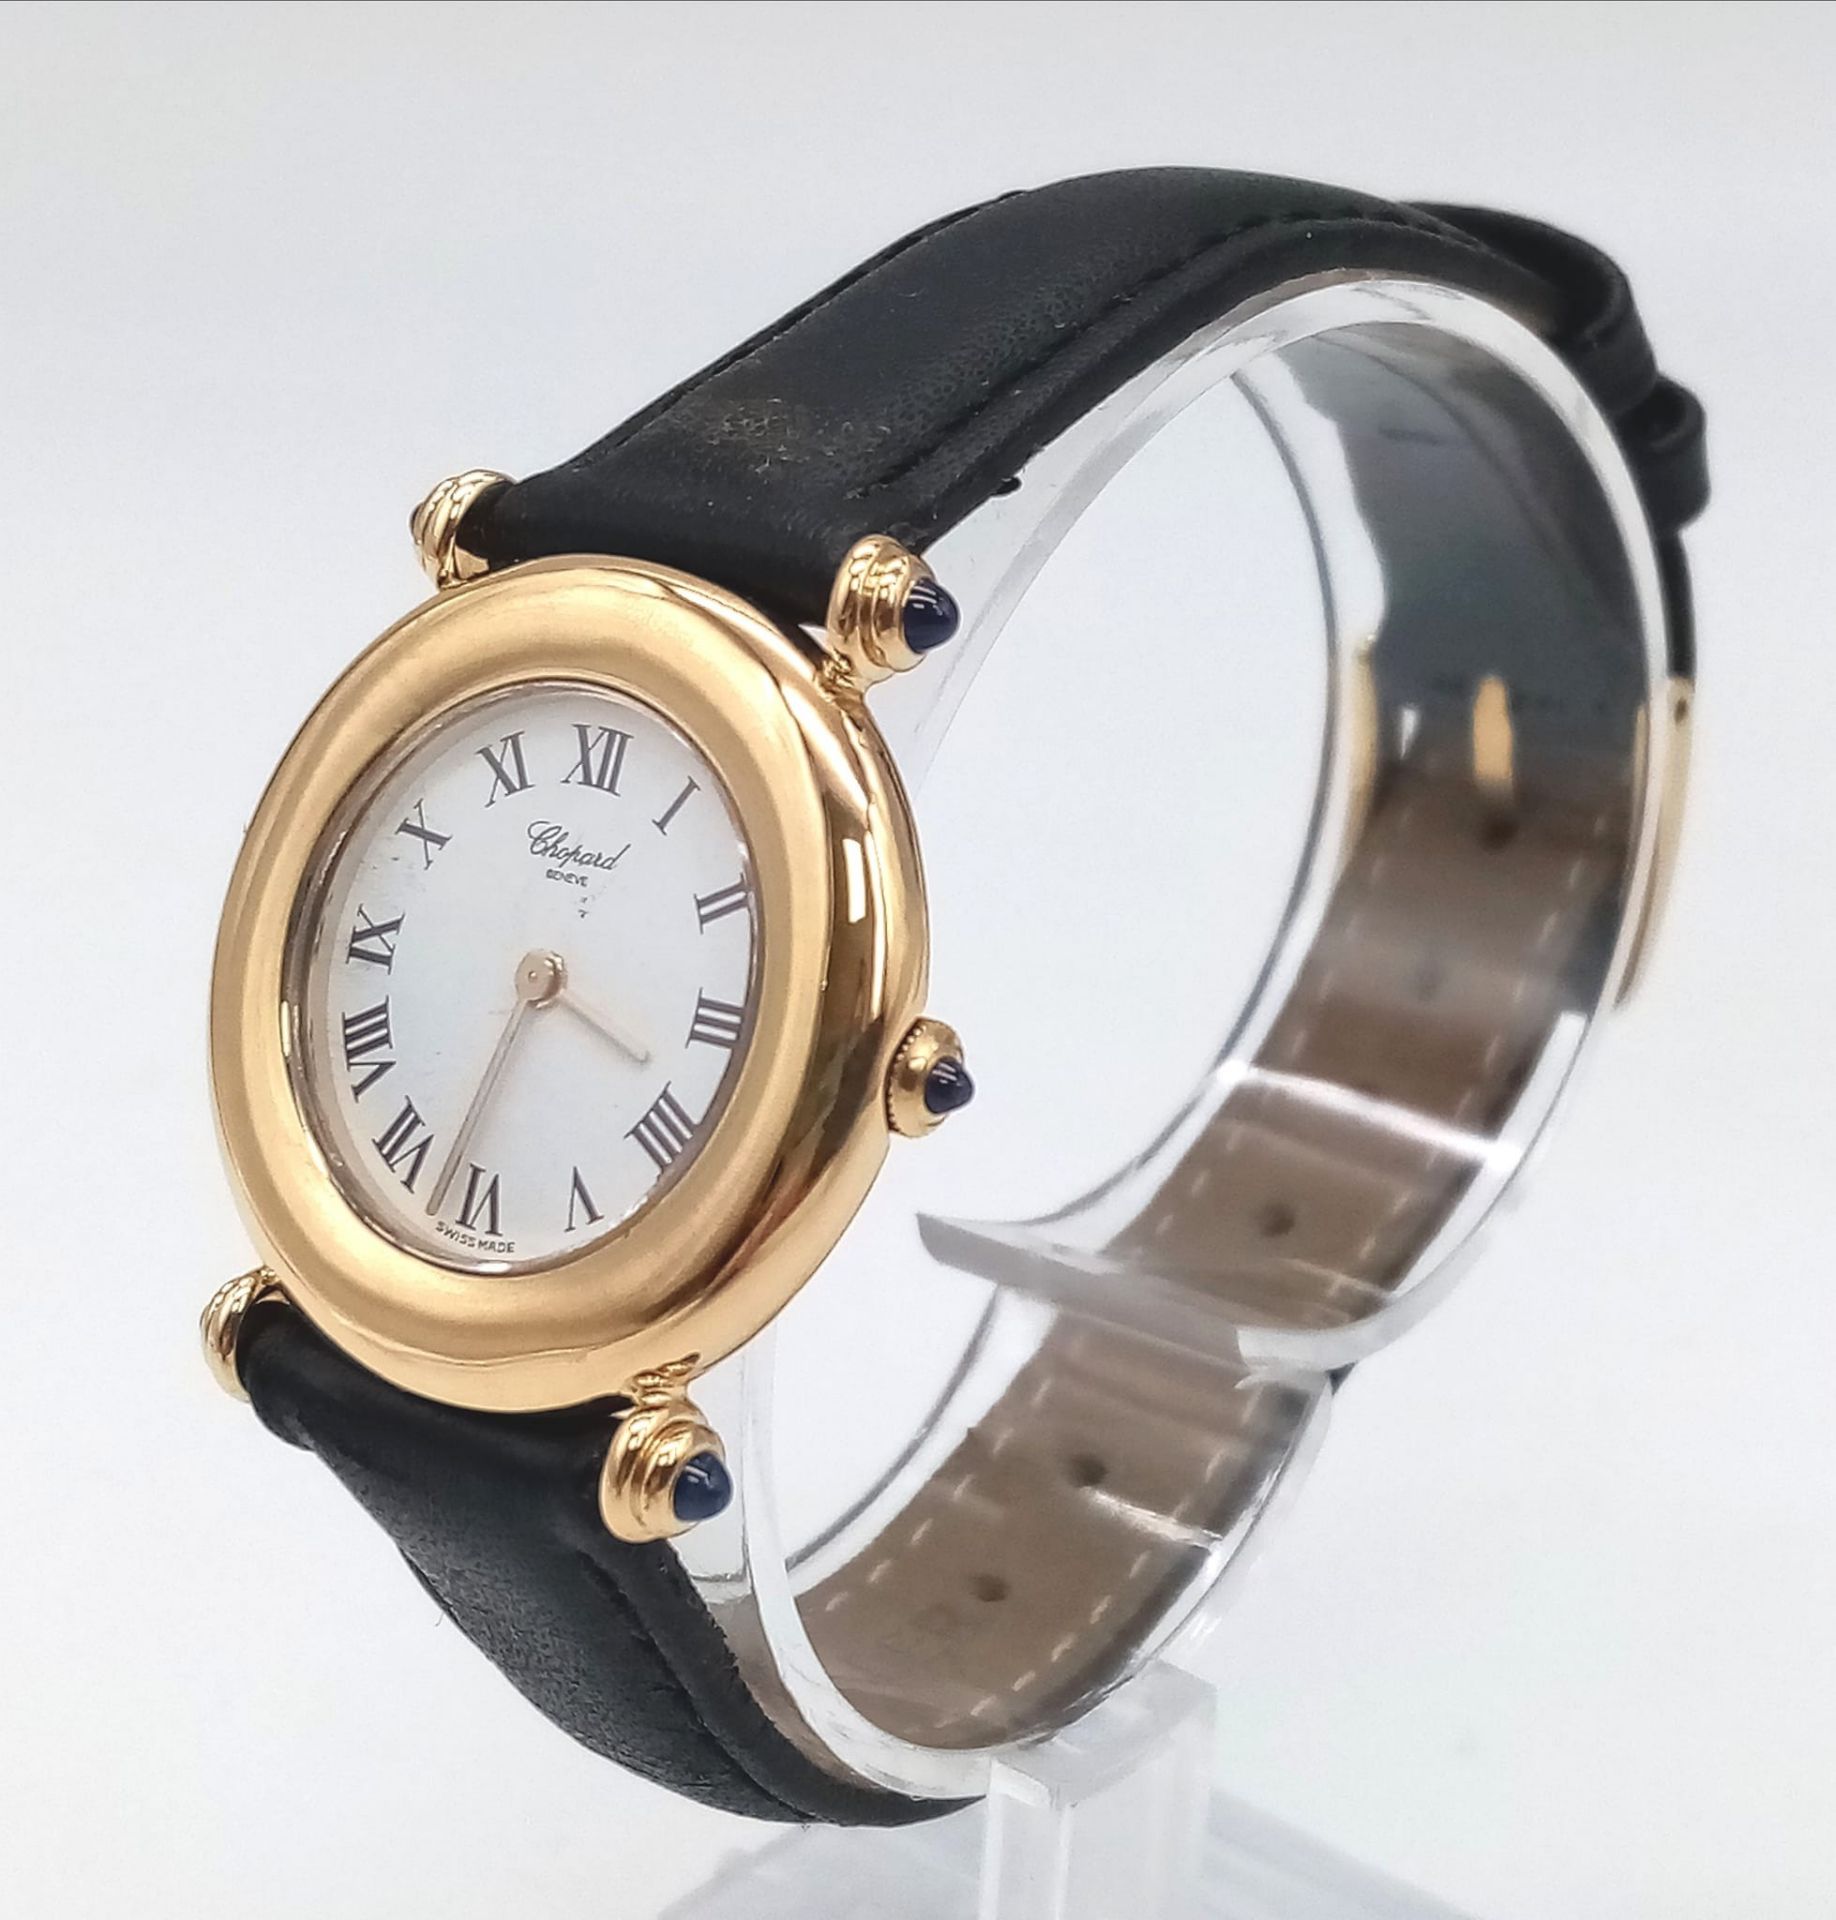 AN 18K GOLD LADIES CHOPARD WRIST WATCH WITH ROMAN NUMERALS , WITH BLACK LEATHER STRAP 27mm - Image 4 of 4